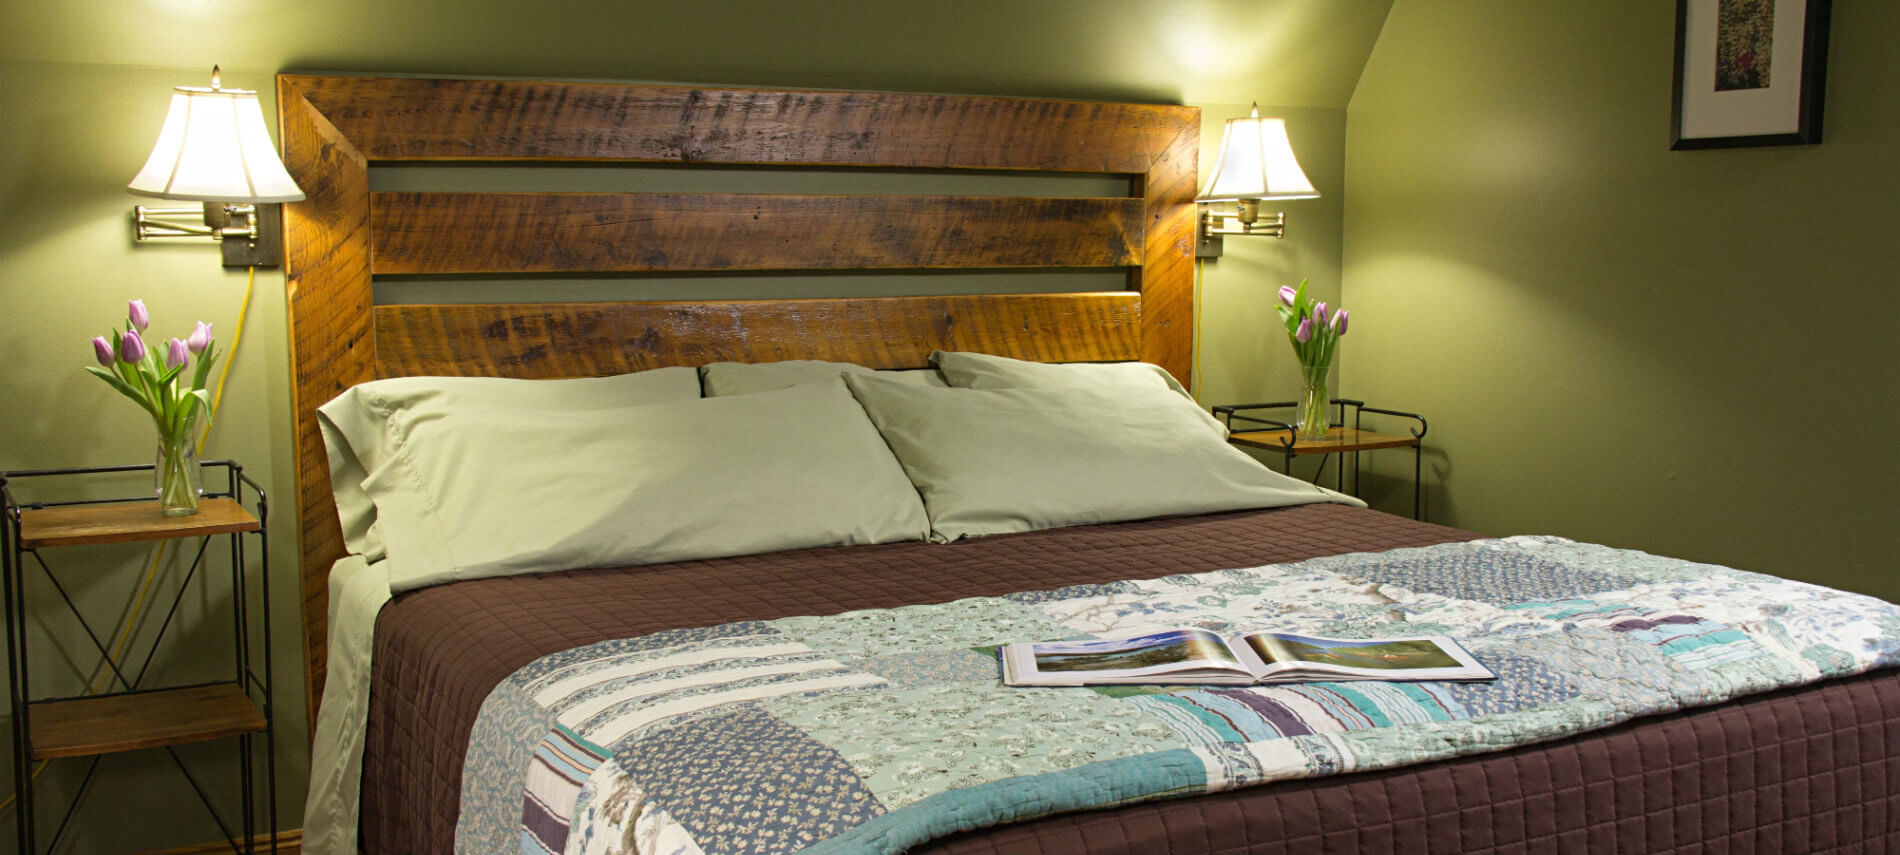 Green guest room with sloped ceilings, wood slatted bed with flanking nightstands and reading lights